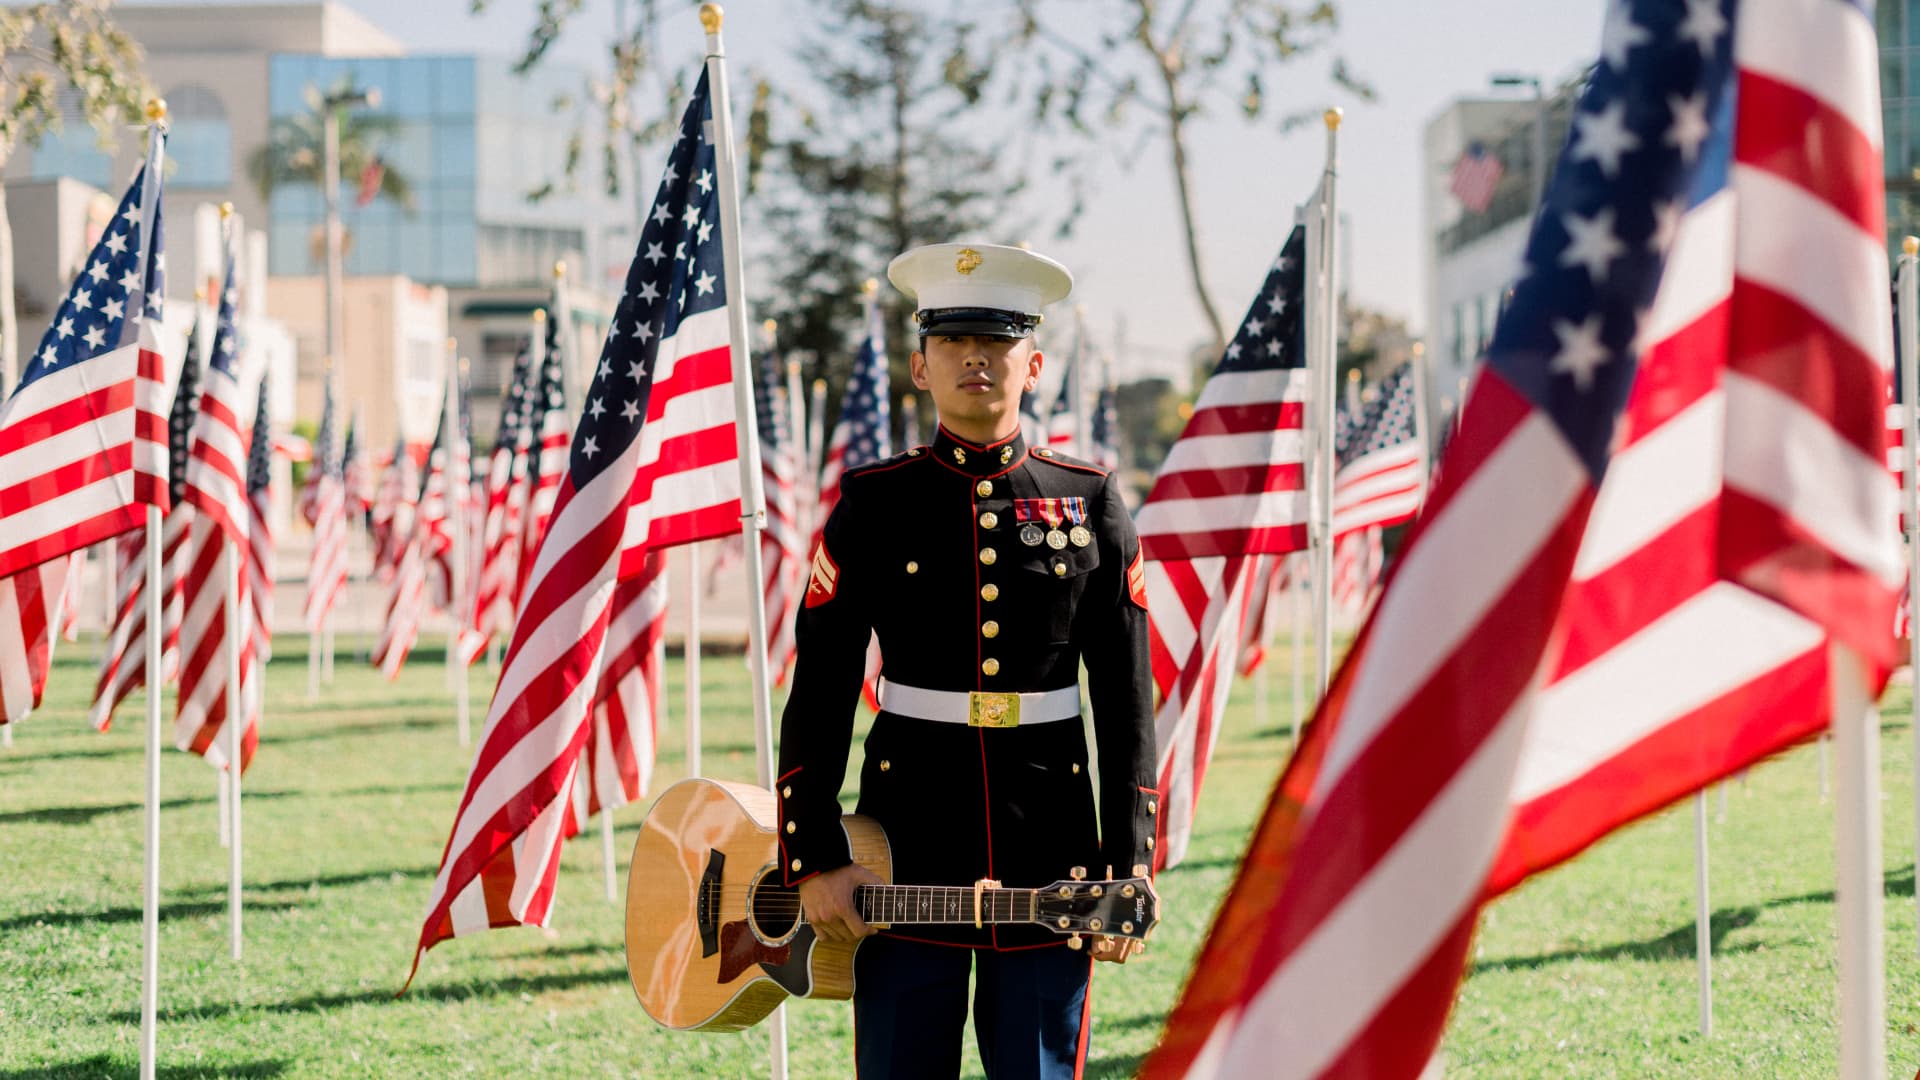 Moses Lin enlisted in the U.S. Marine Corps in order to pay for college. He played guitar for the Marine Corps band.